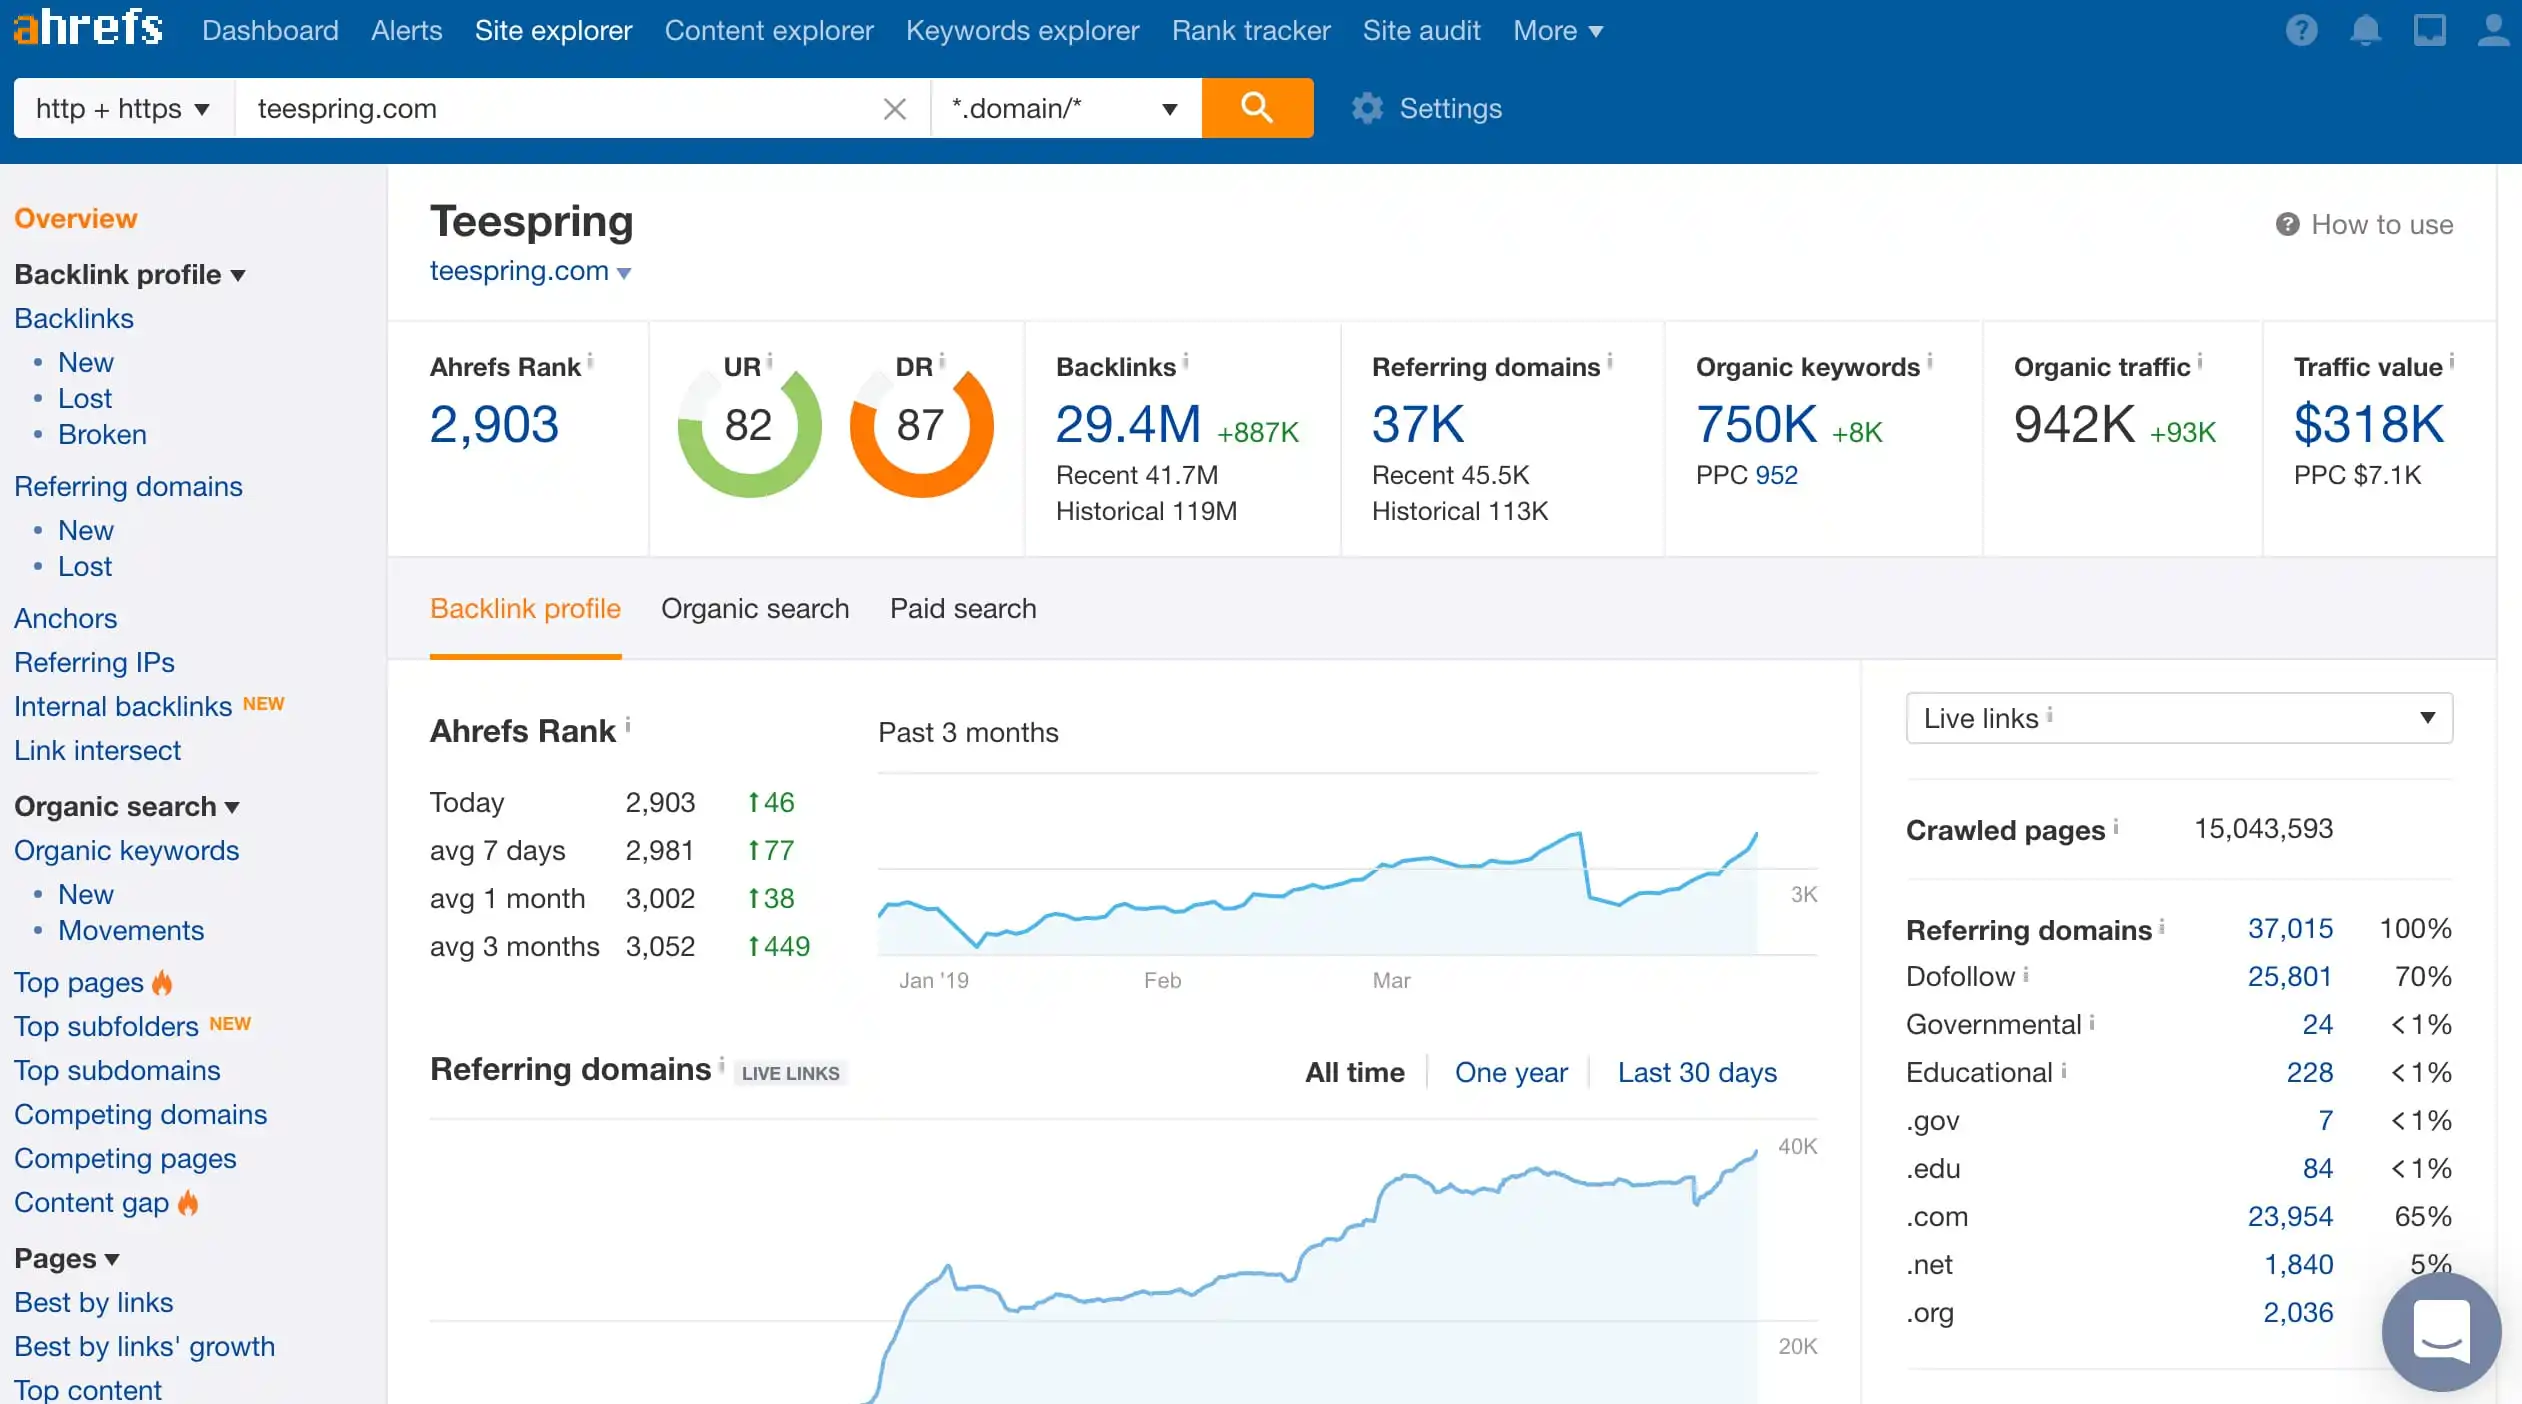 Ahrefs site explorer page doing data such as domain rating, organic keywords, and backlinks